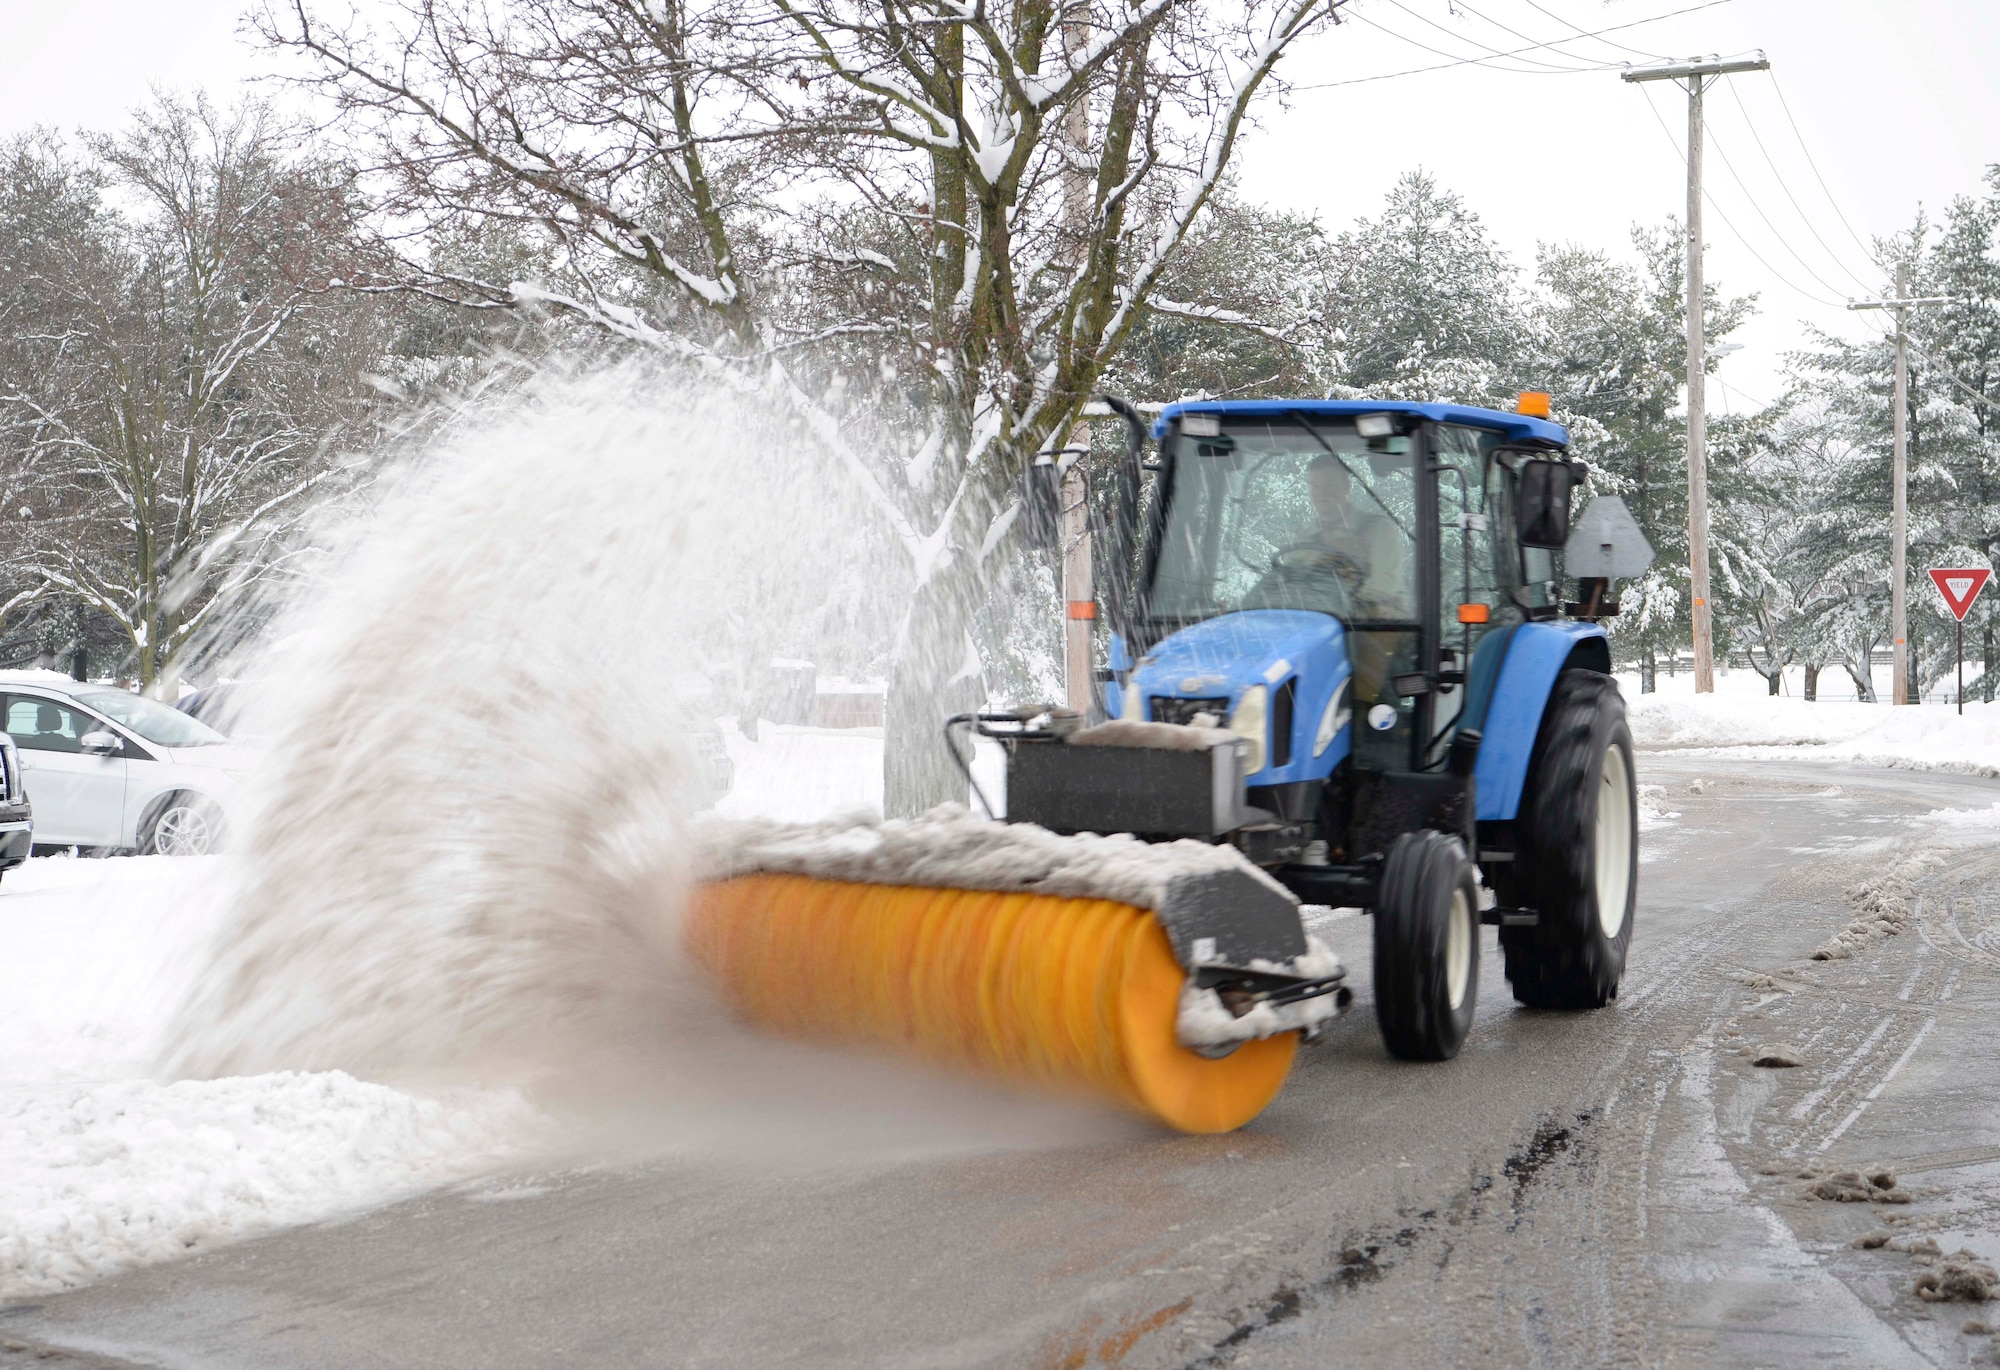 Senior Airman Caleb Lyons, 375th Civil Engineer Squadron water and fuels system maintenance journeyman, uses a tractor and broom to clear snow off the streets Jan. 12, 2019, after heavy snowfall hit Scott Air Force Base, Illinois. Each shift requires about 20 people to aid in the process of clearing the roads.